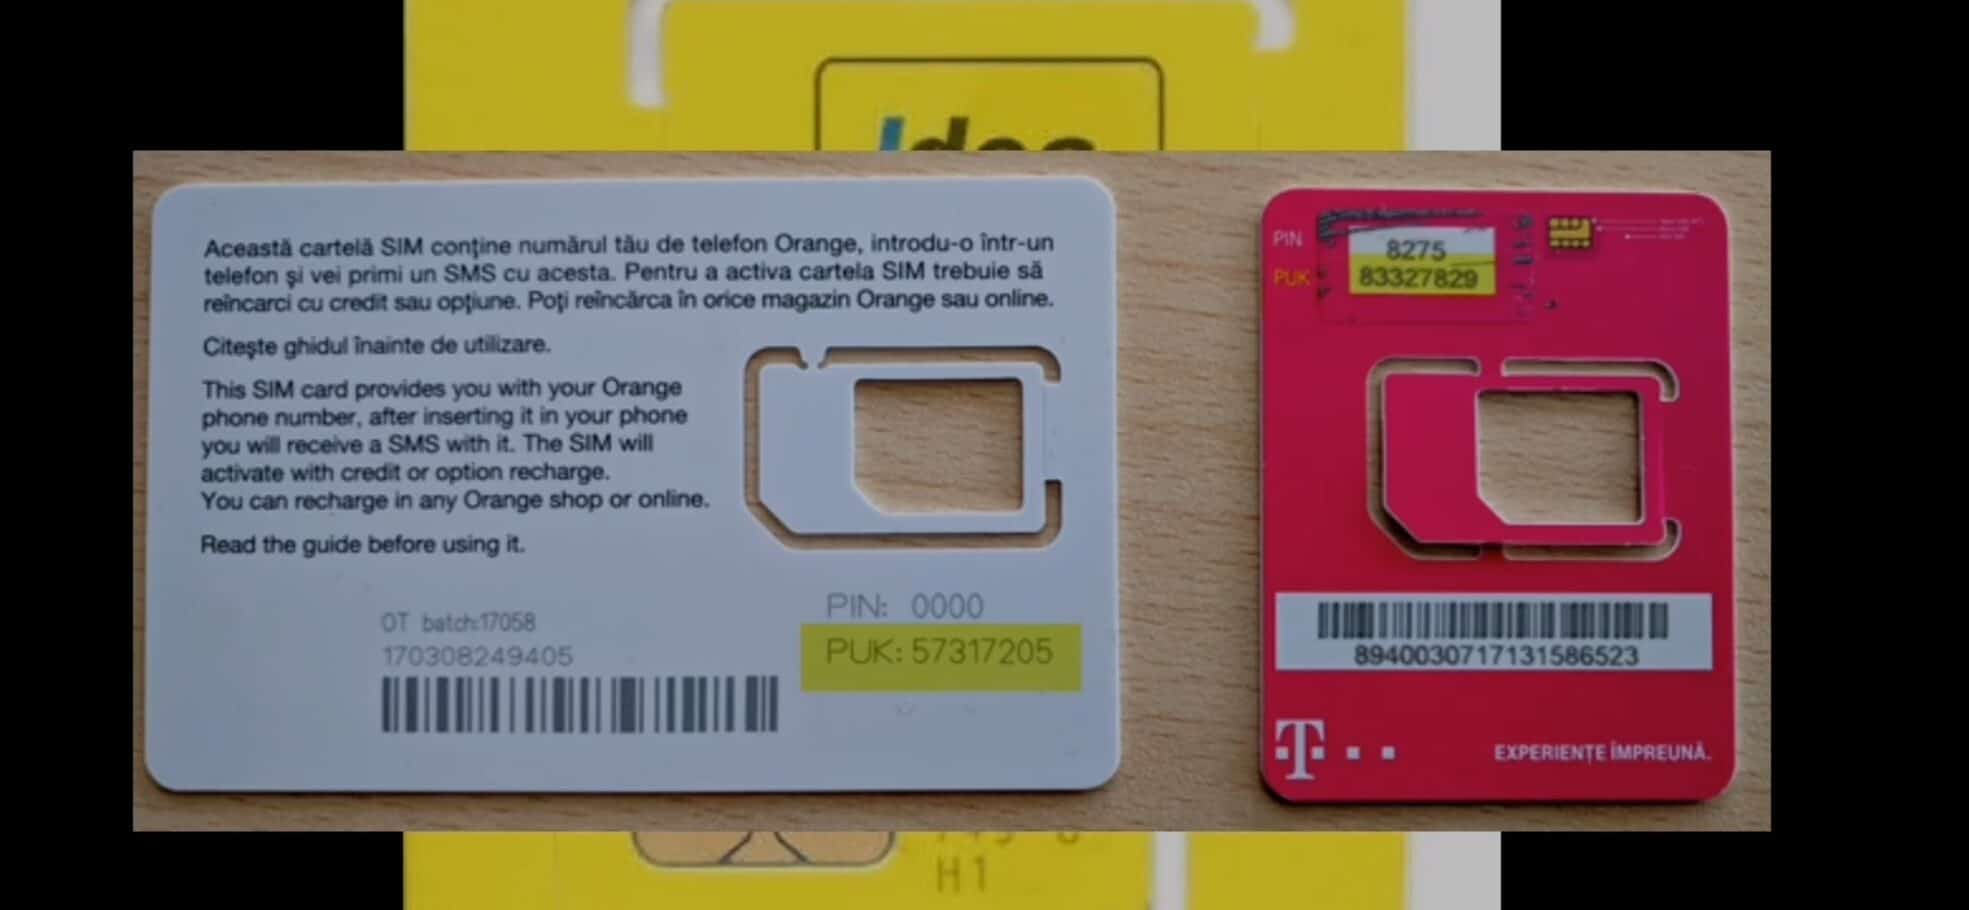 Know the Idea PUK code by using the SIM card packet